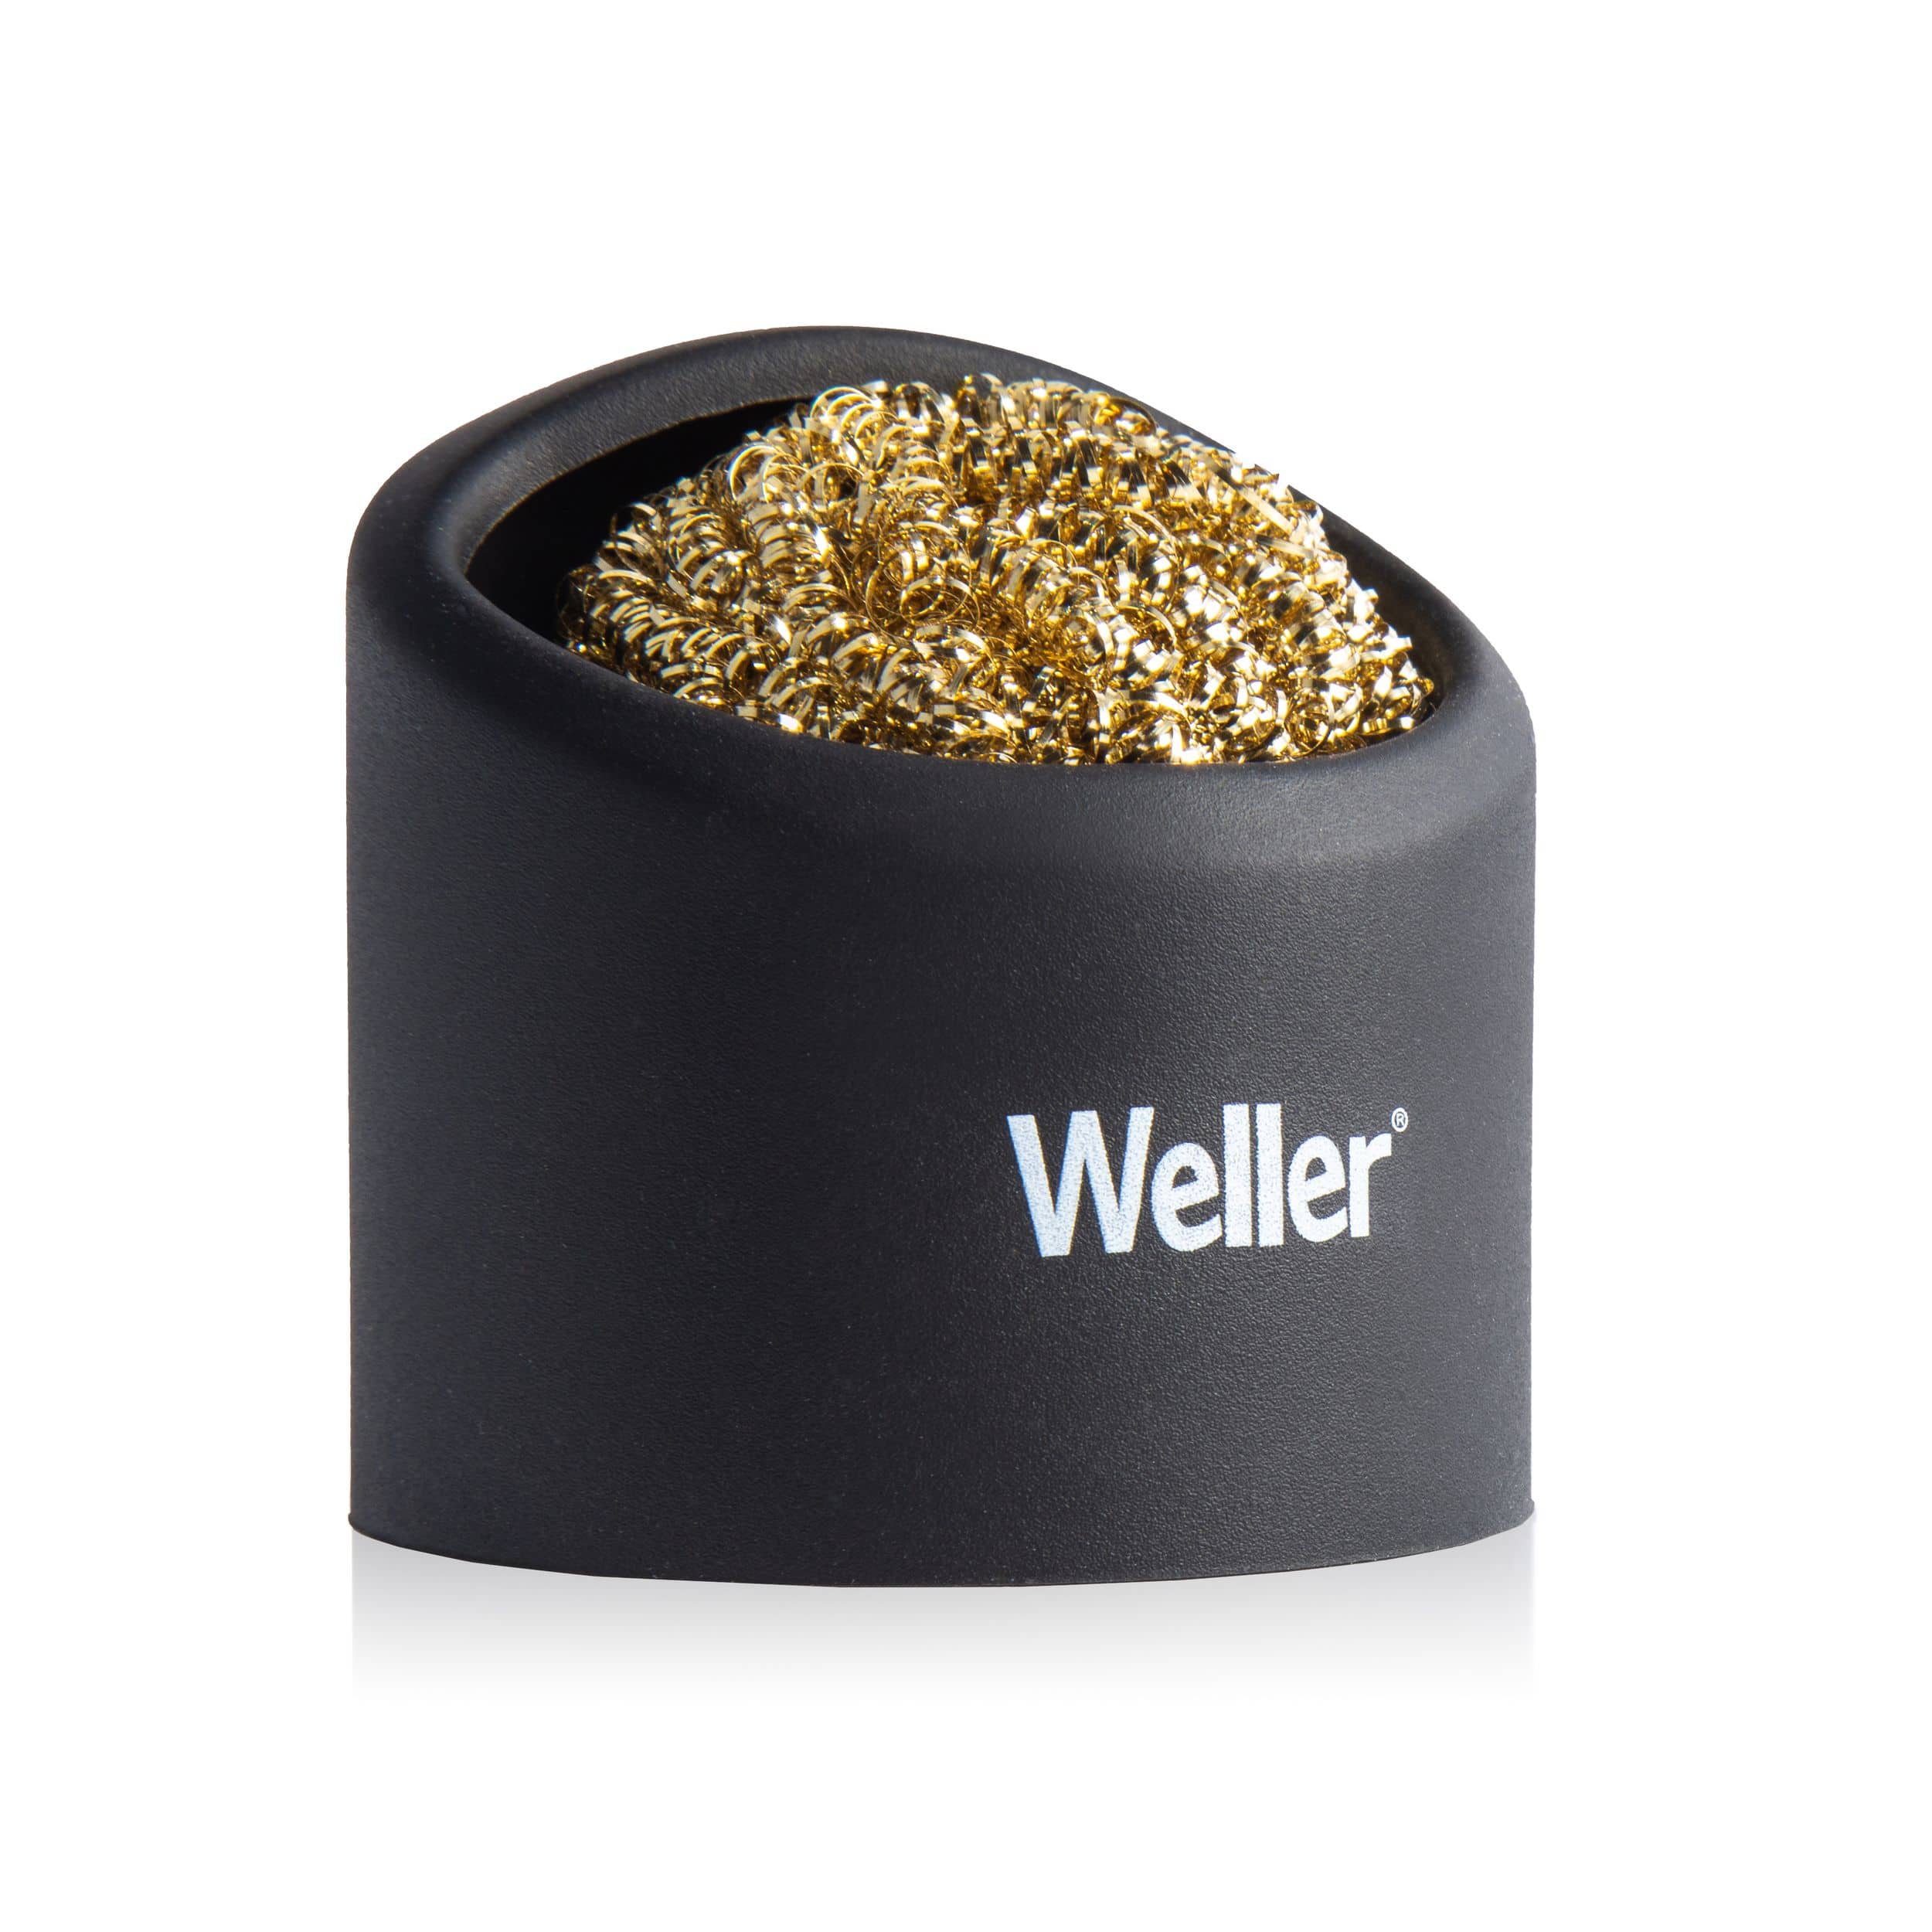 Weller WLACCBSH Brass SPonge with Silicone Holder